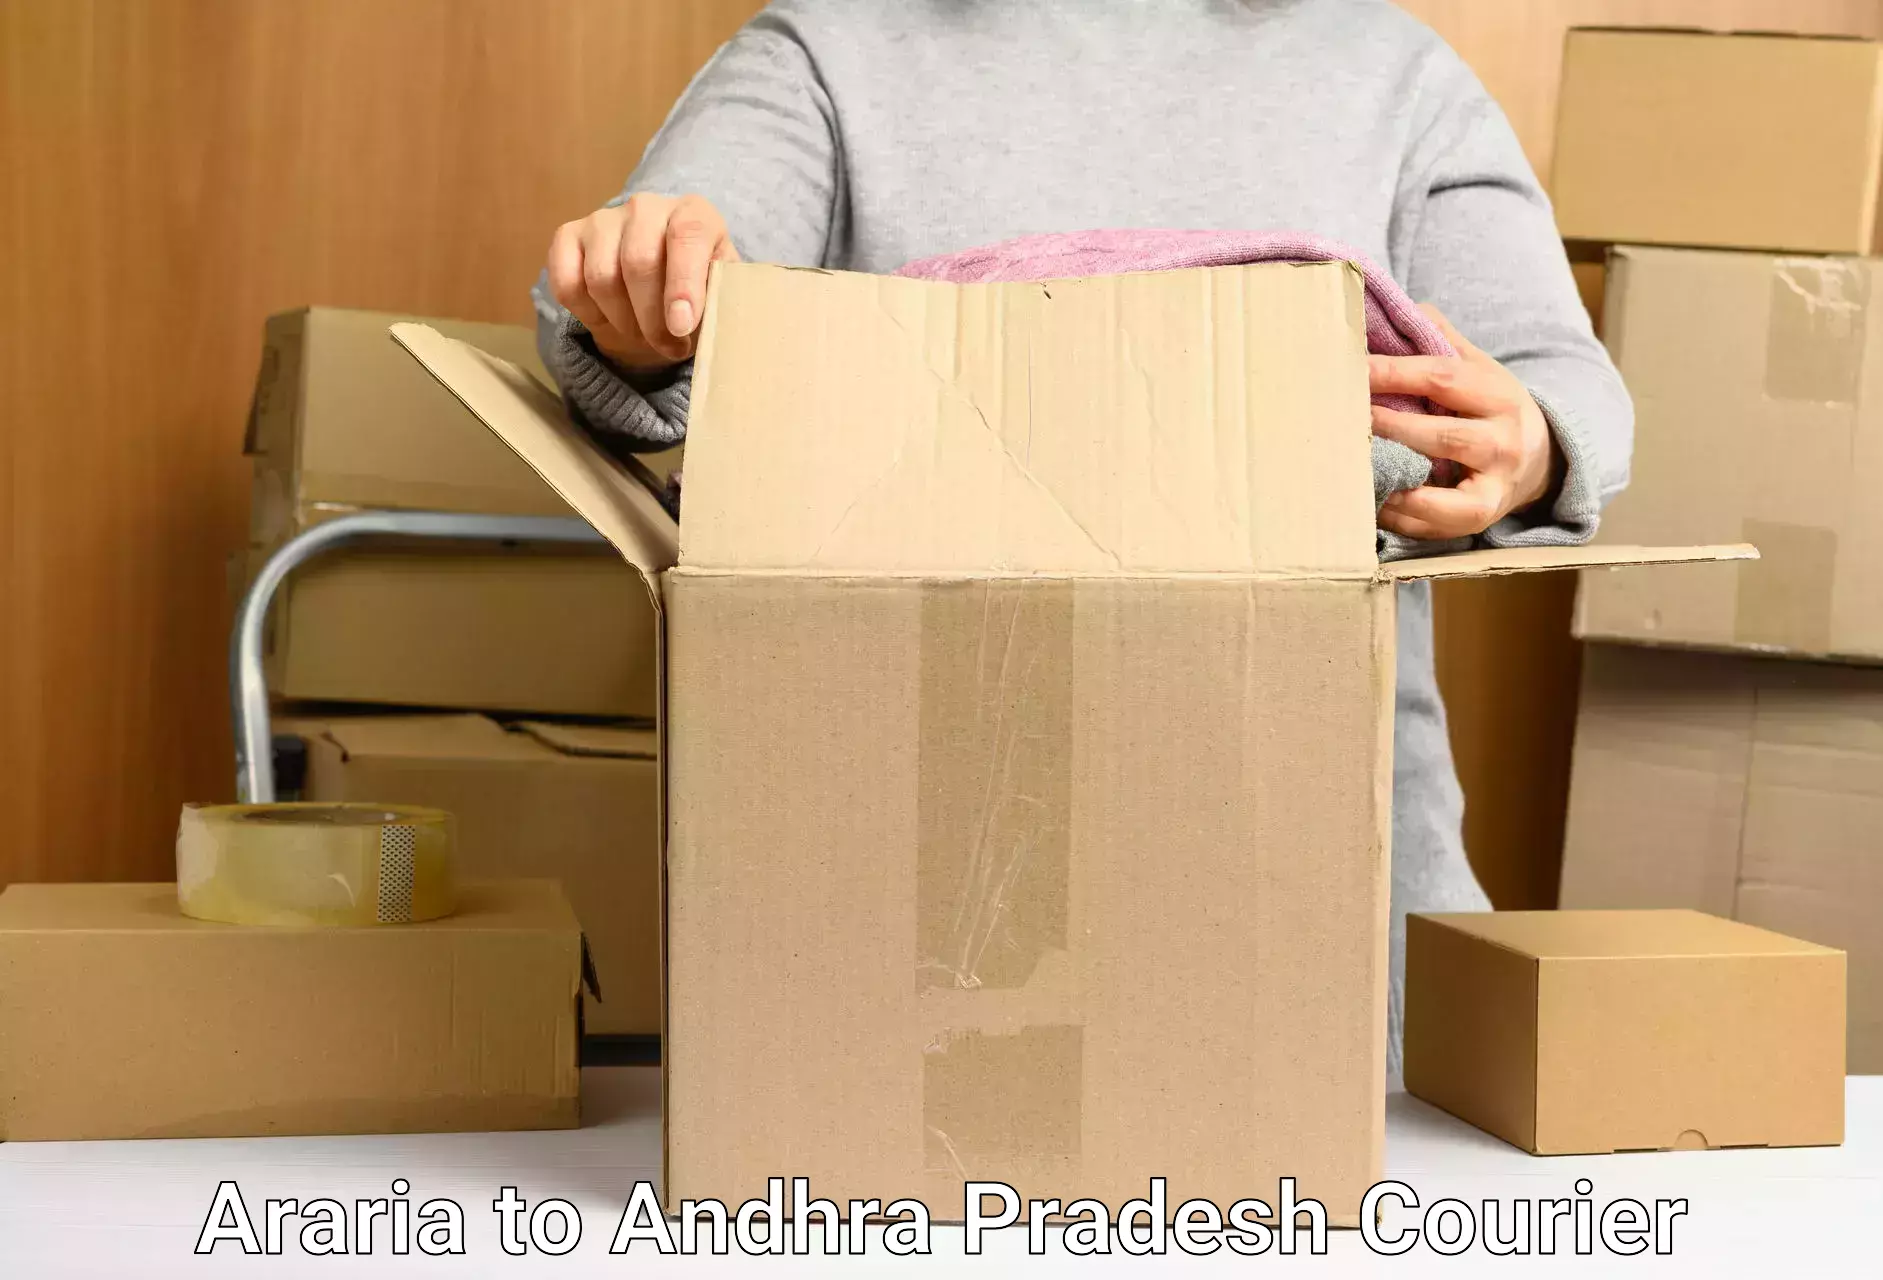 Custom courier packaging Araria to Hindupur